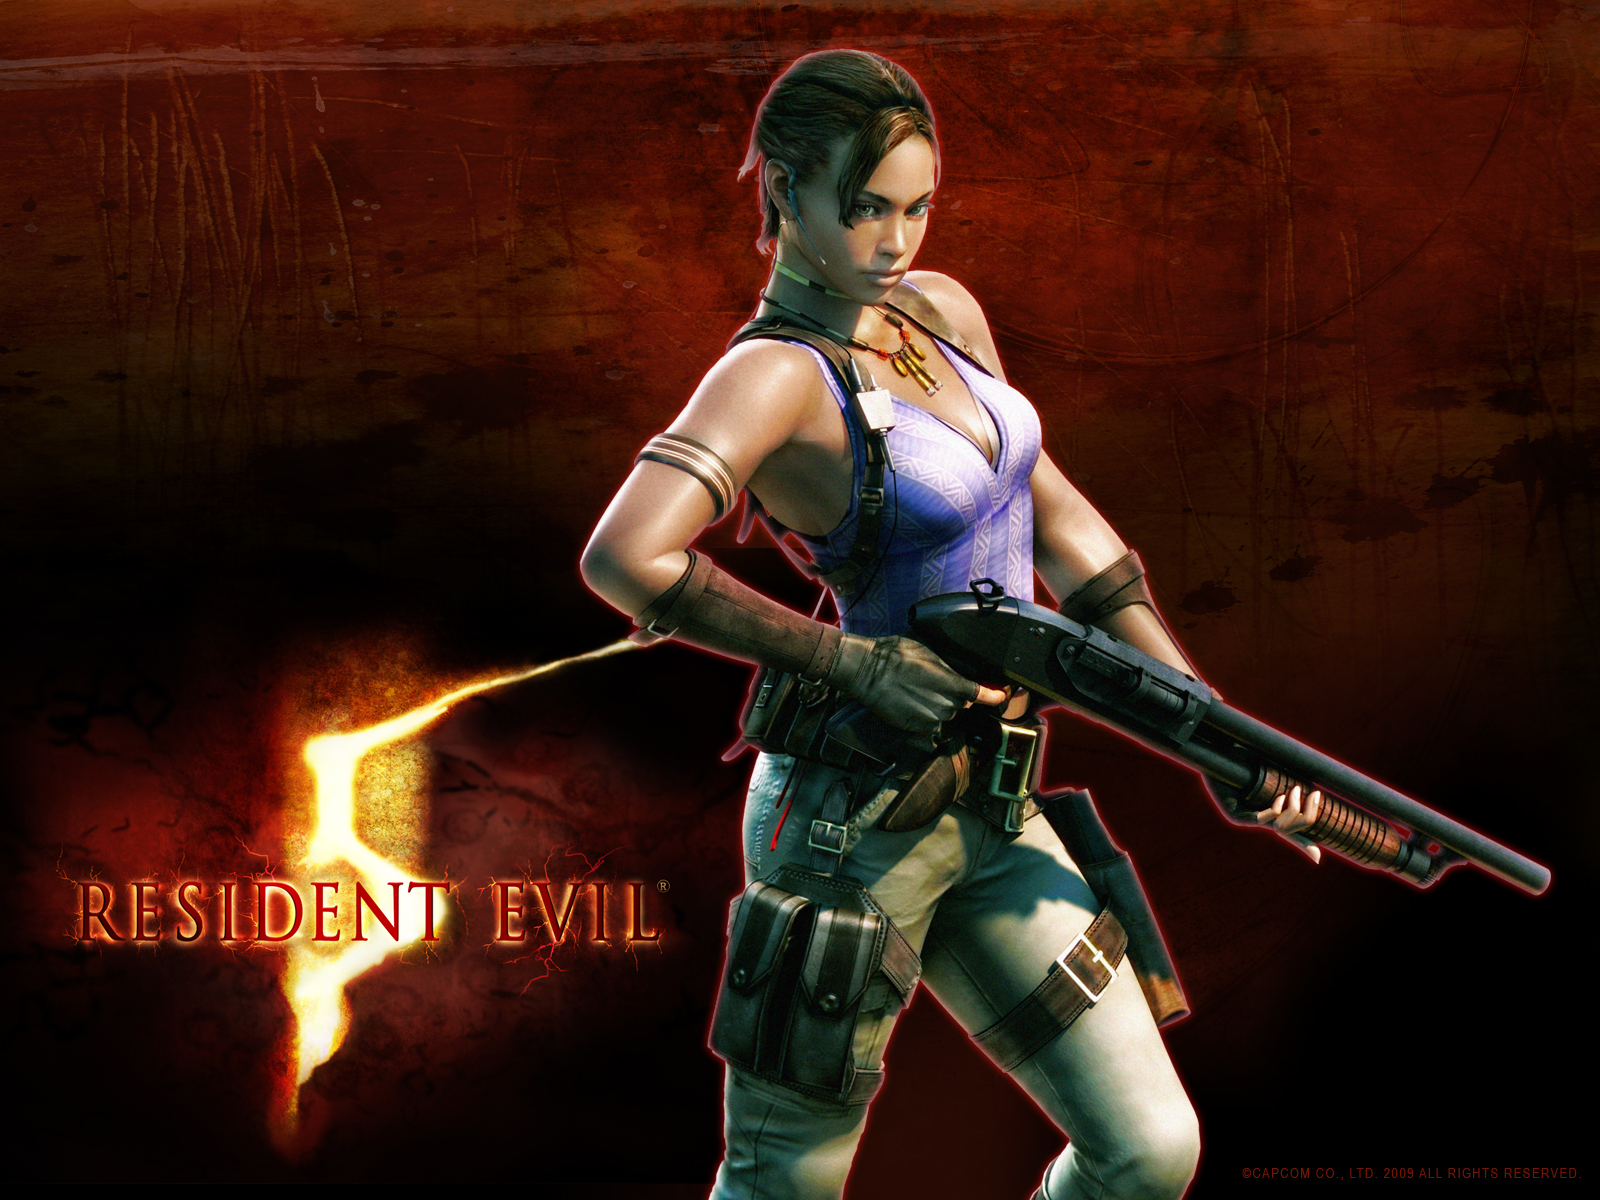 Image Resident Evil Pc Android iPhone And iPad Wallpaper